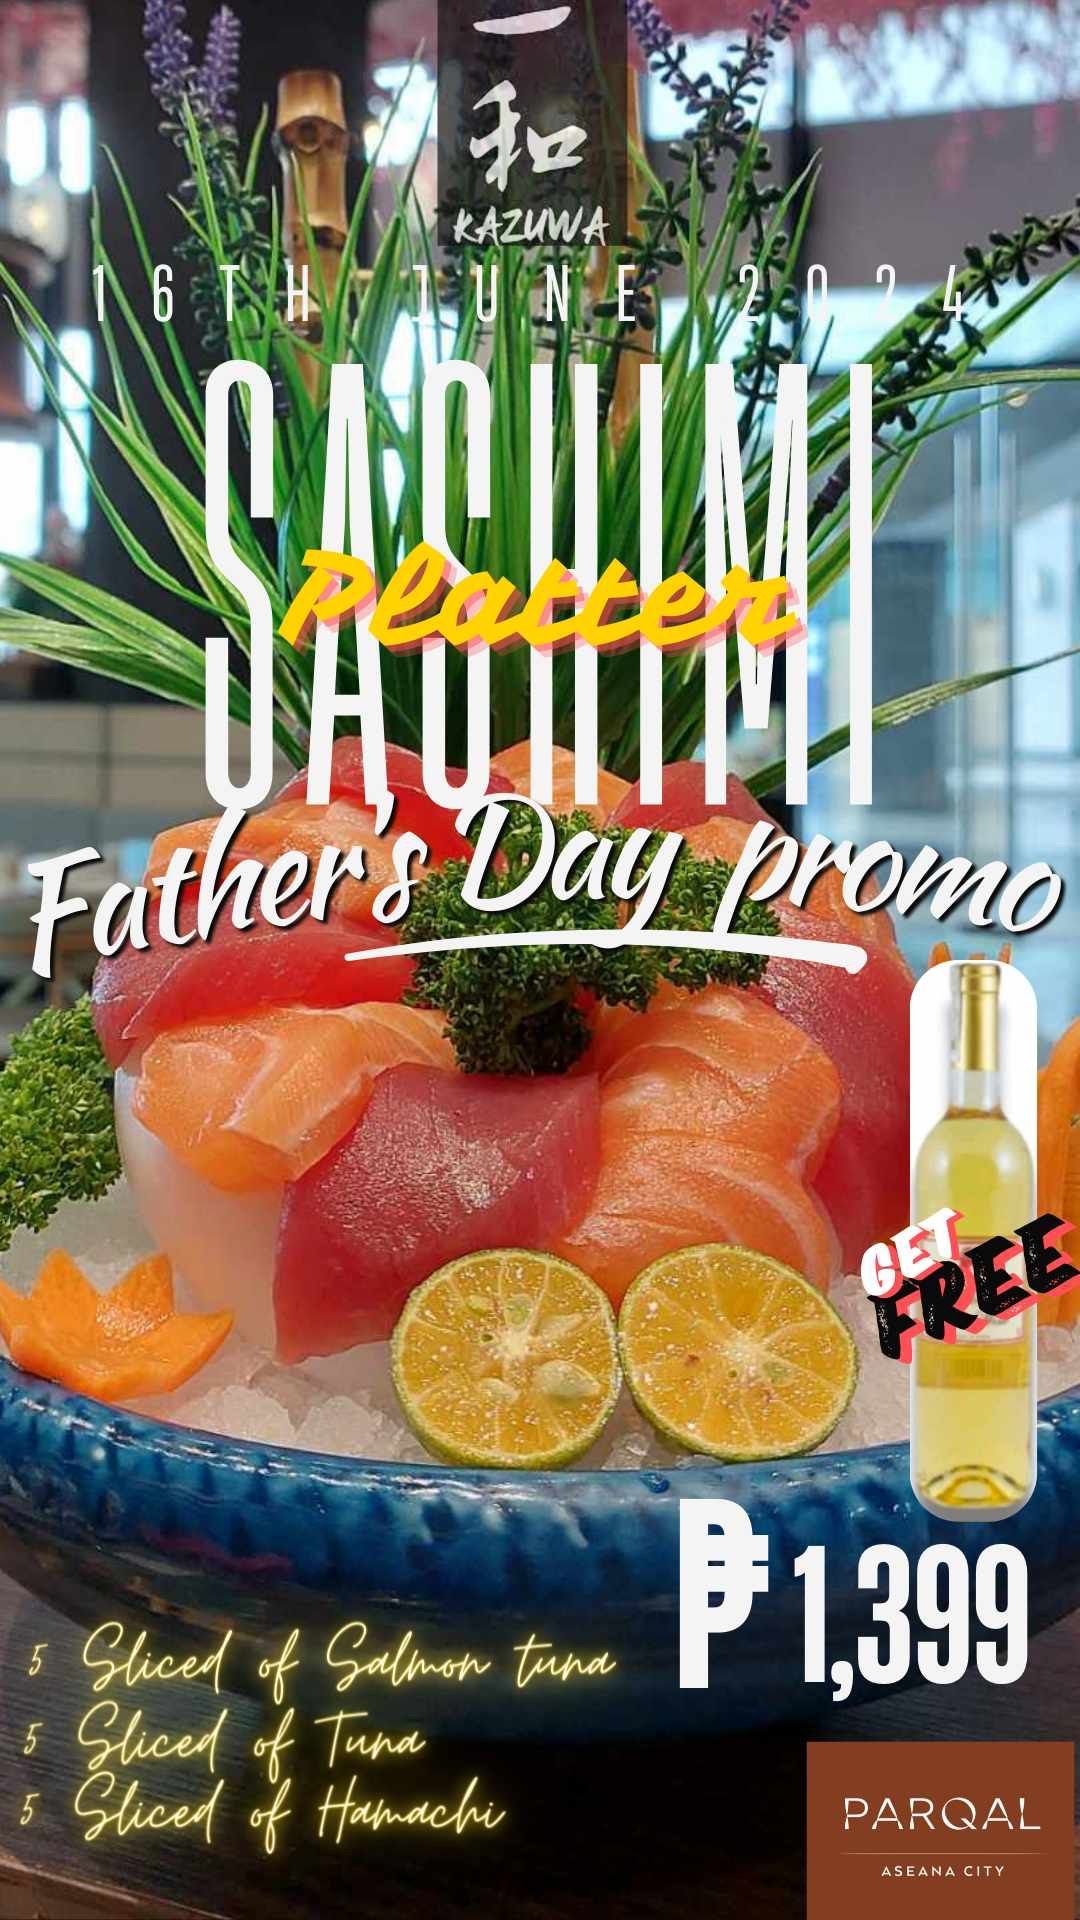 Father's Day Special at Sushi Restaurant